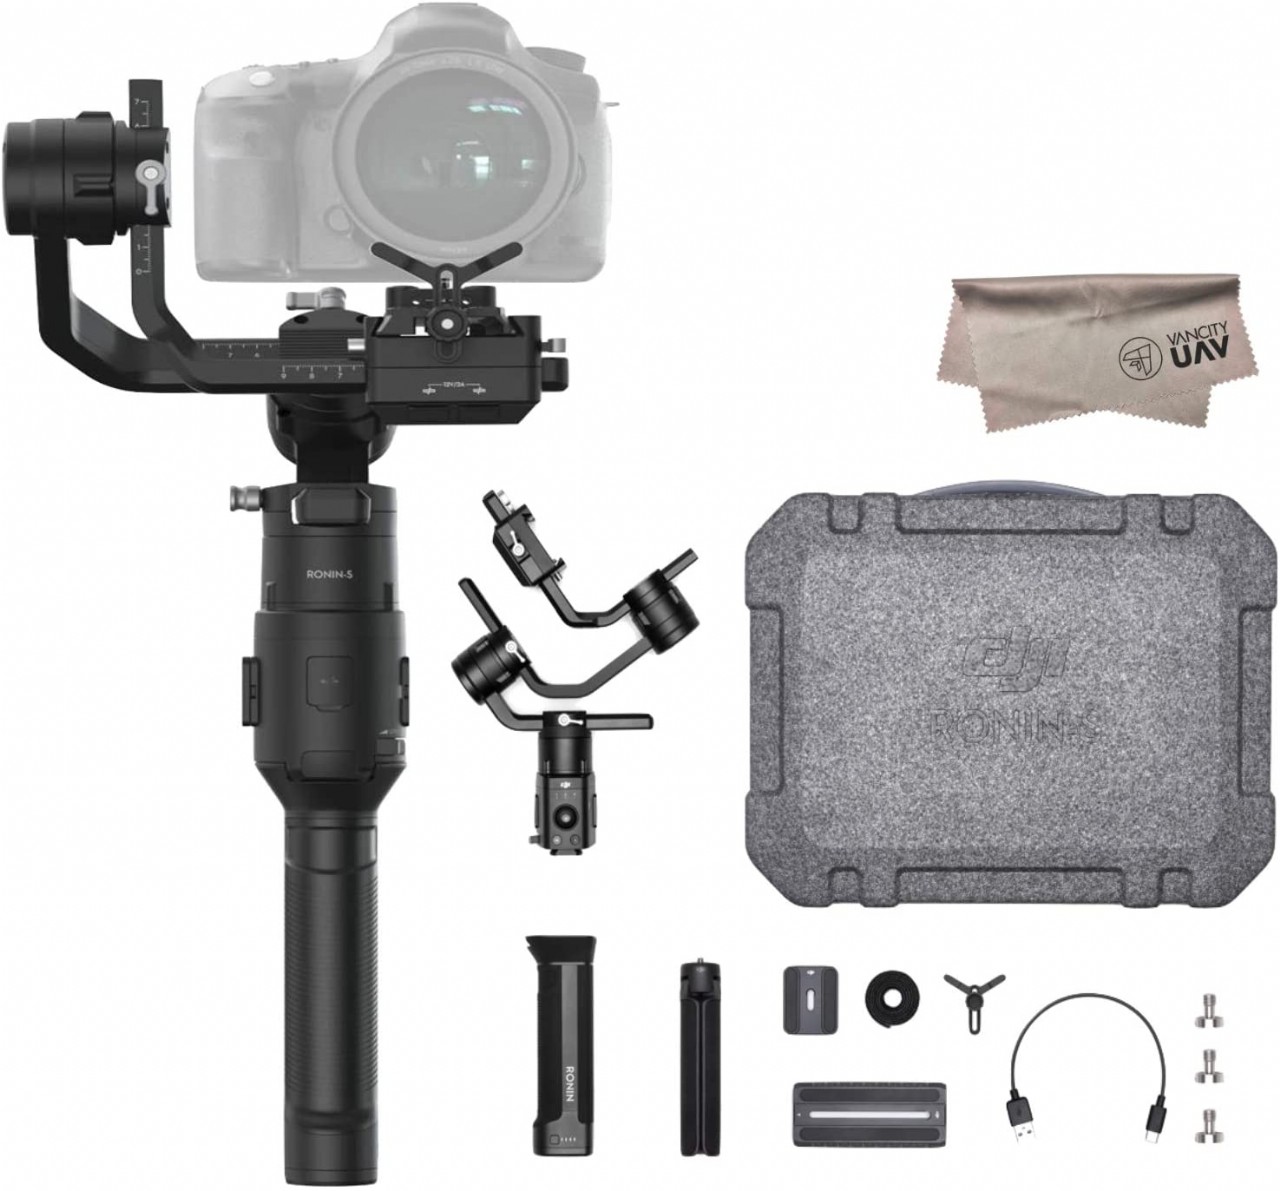 2019 DJI Ronin-S Essentials Kit 3-Axis Gimbal Stabilizer for Mirrorless and DSLR Cameras, Tripod